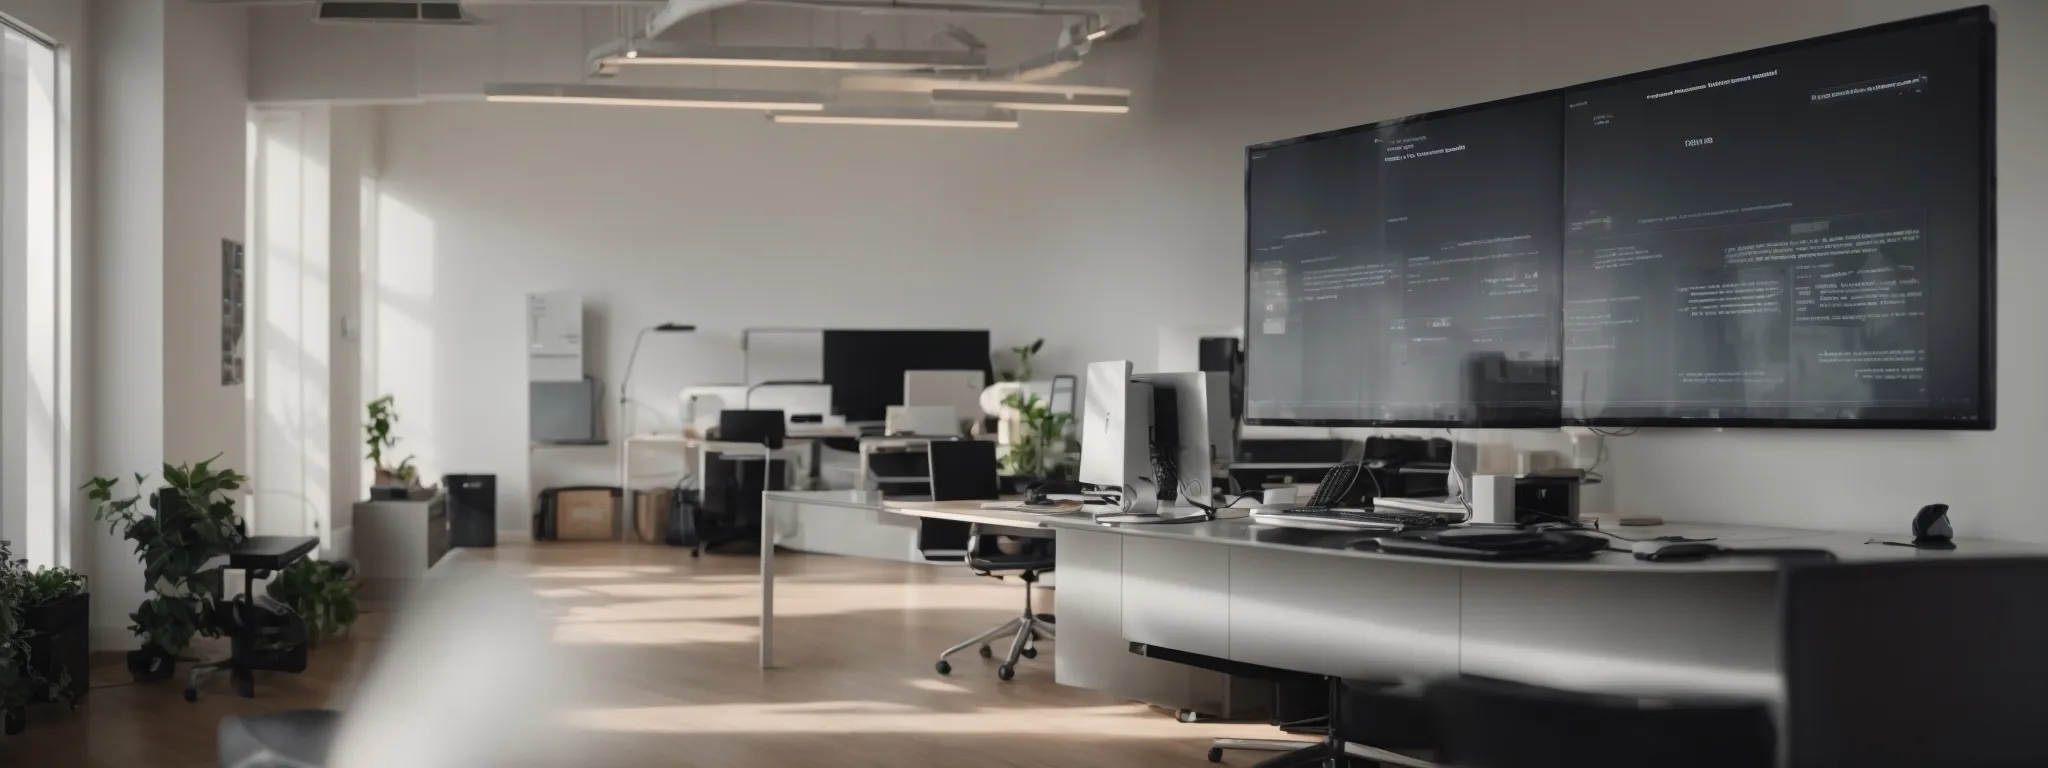 a sleek, modern office space with a single computer showcasing a search engine on its screen, surrounded by a clean, uncluttered environment.